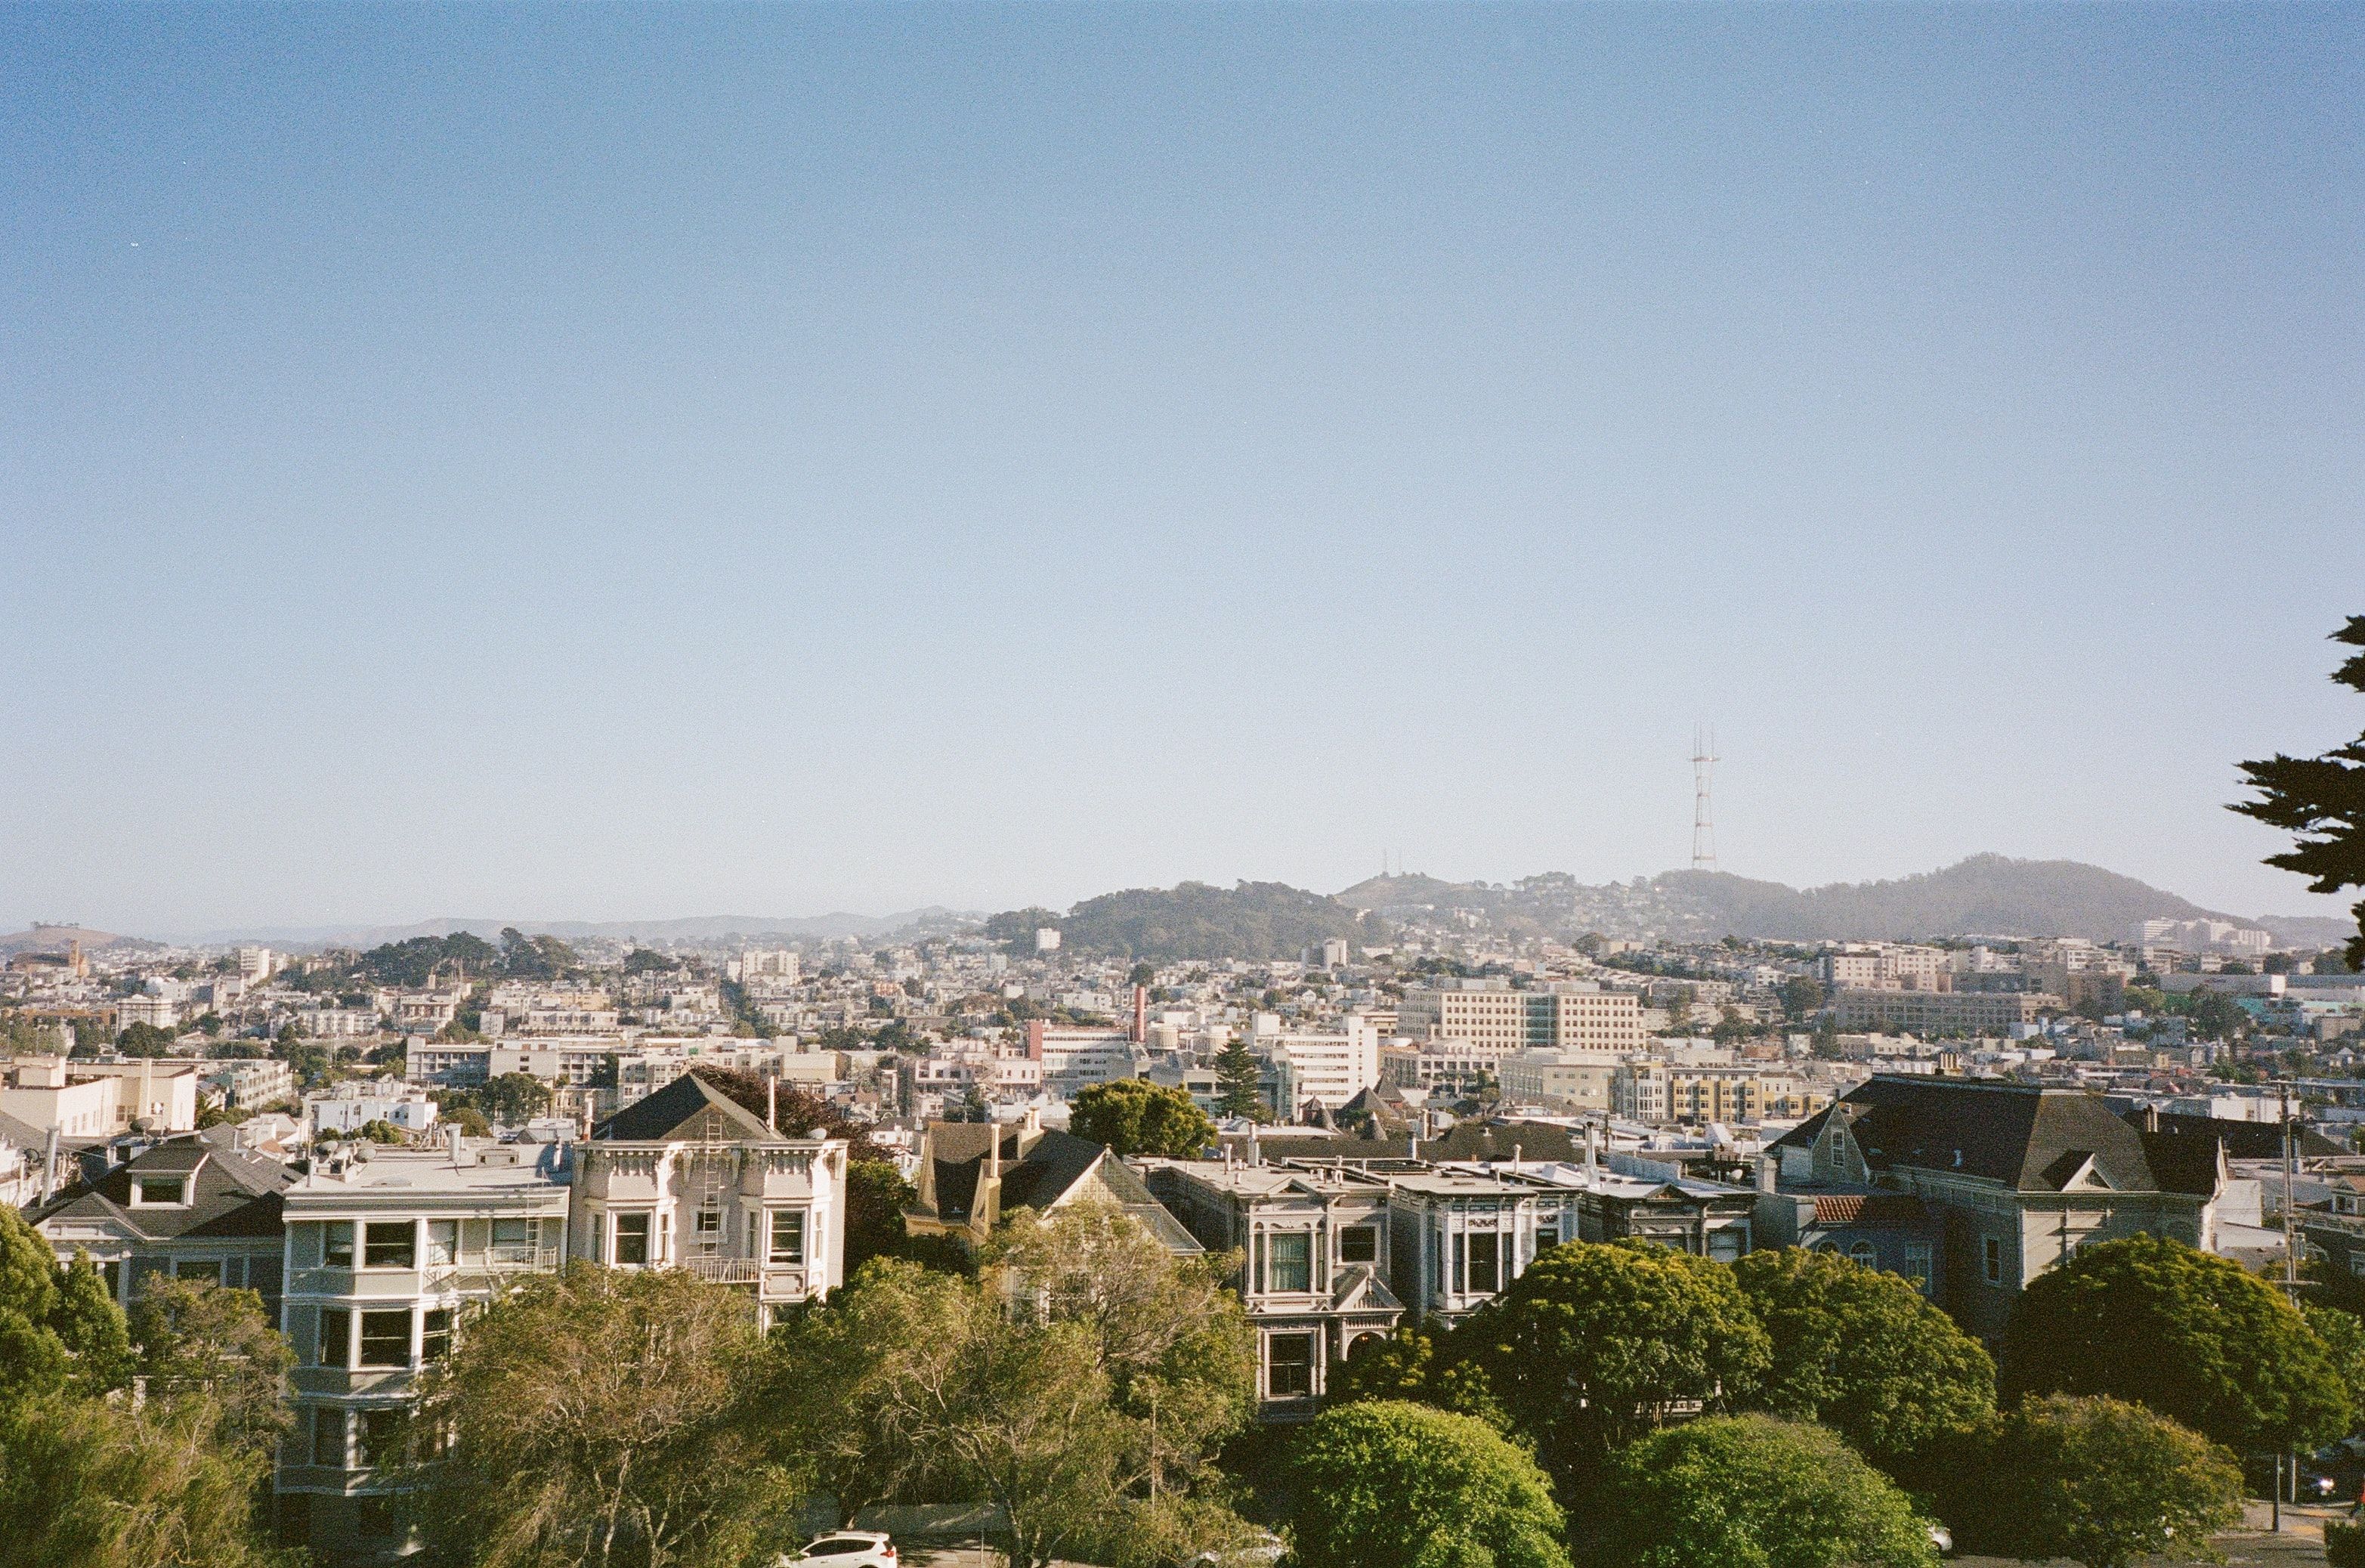 photo of a city taken with a film photography style